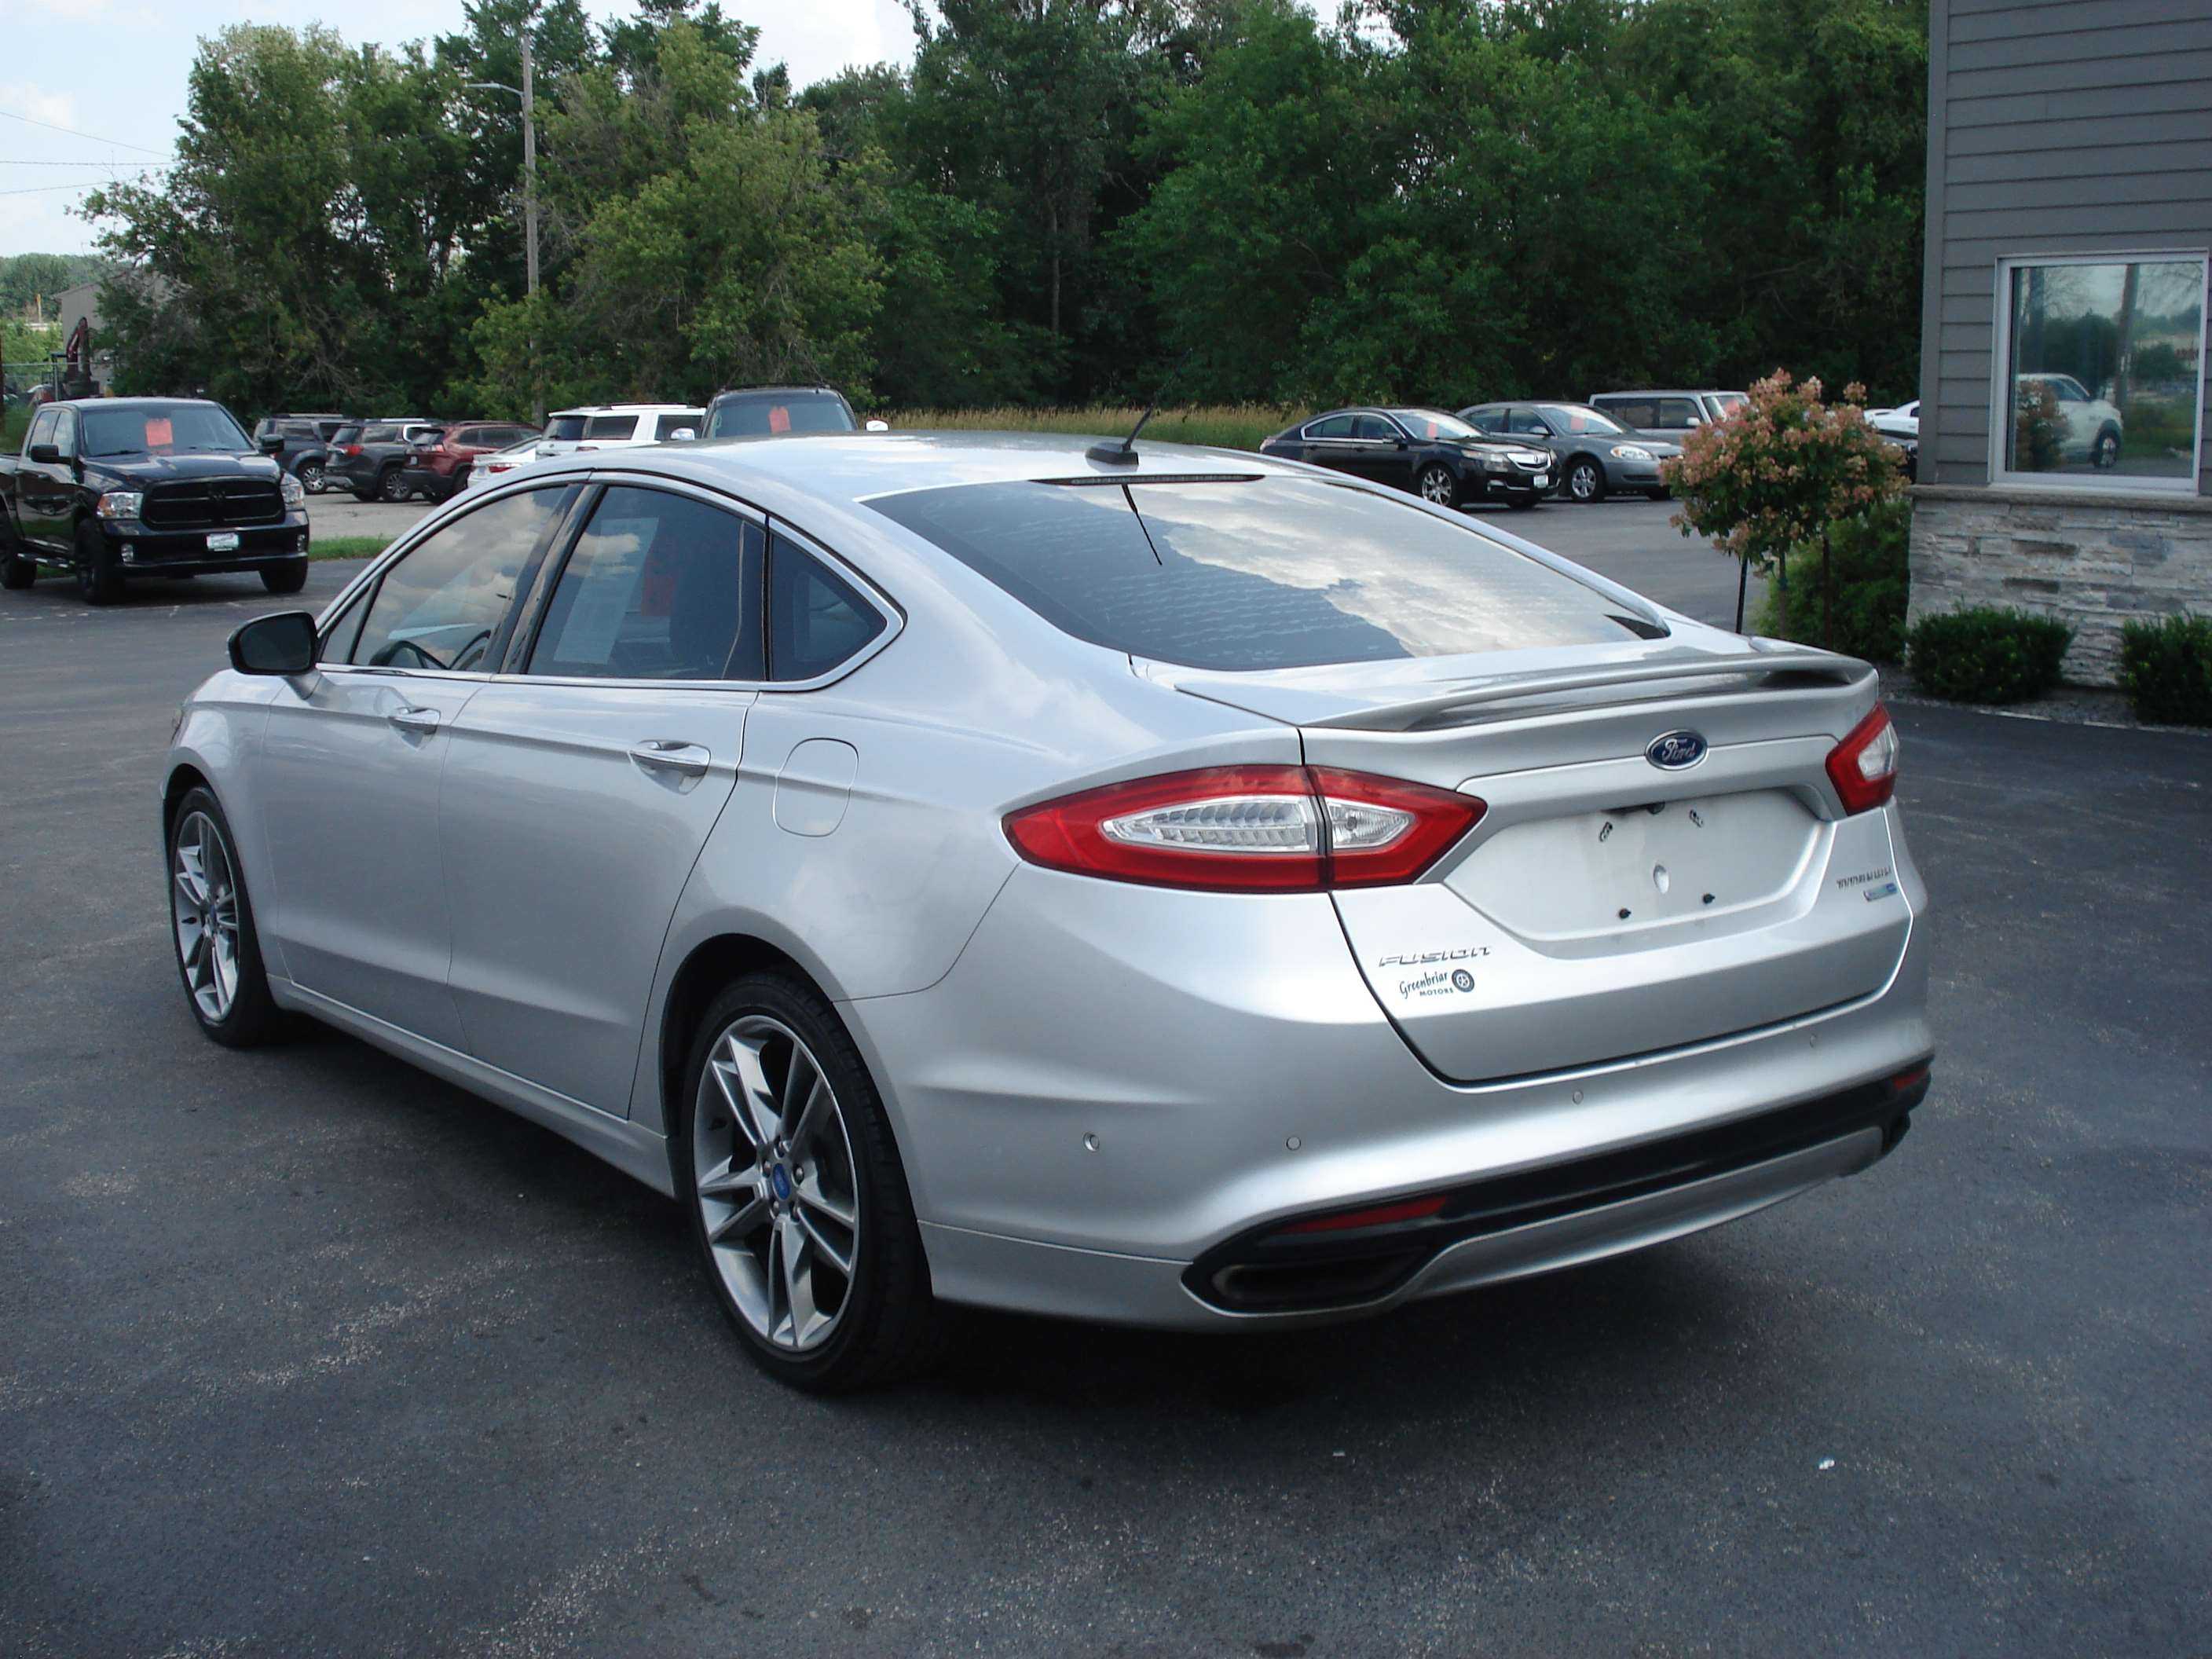 Ford Fusion Image 8